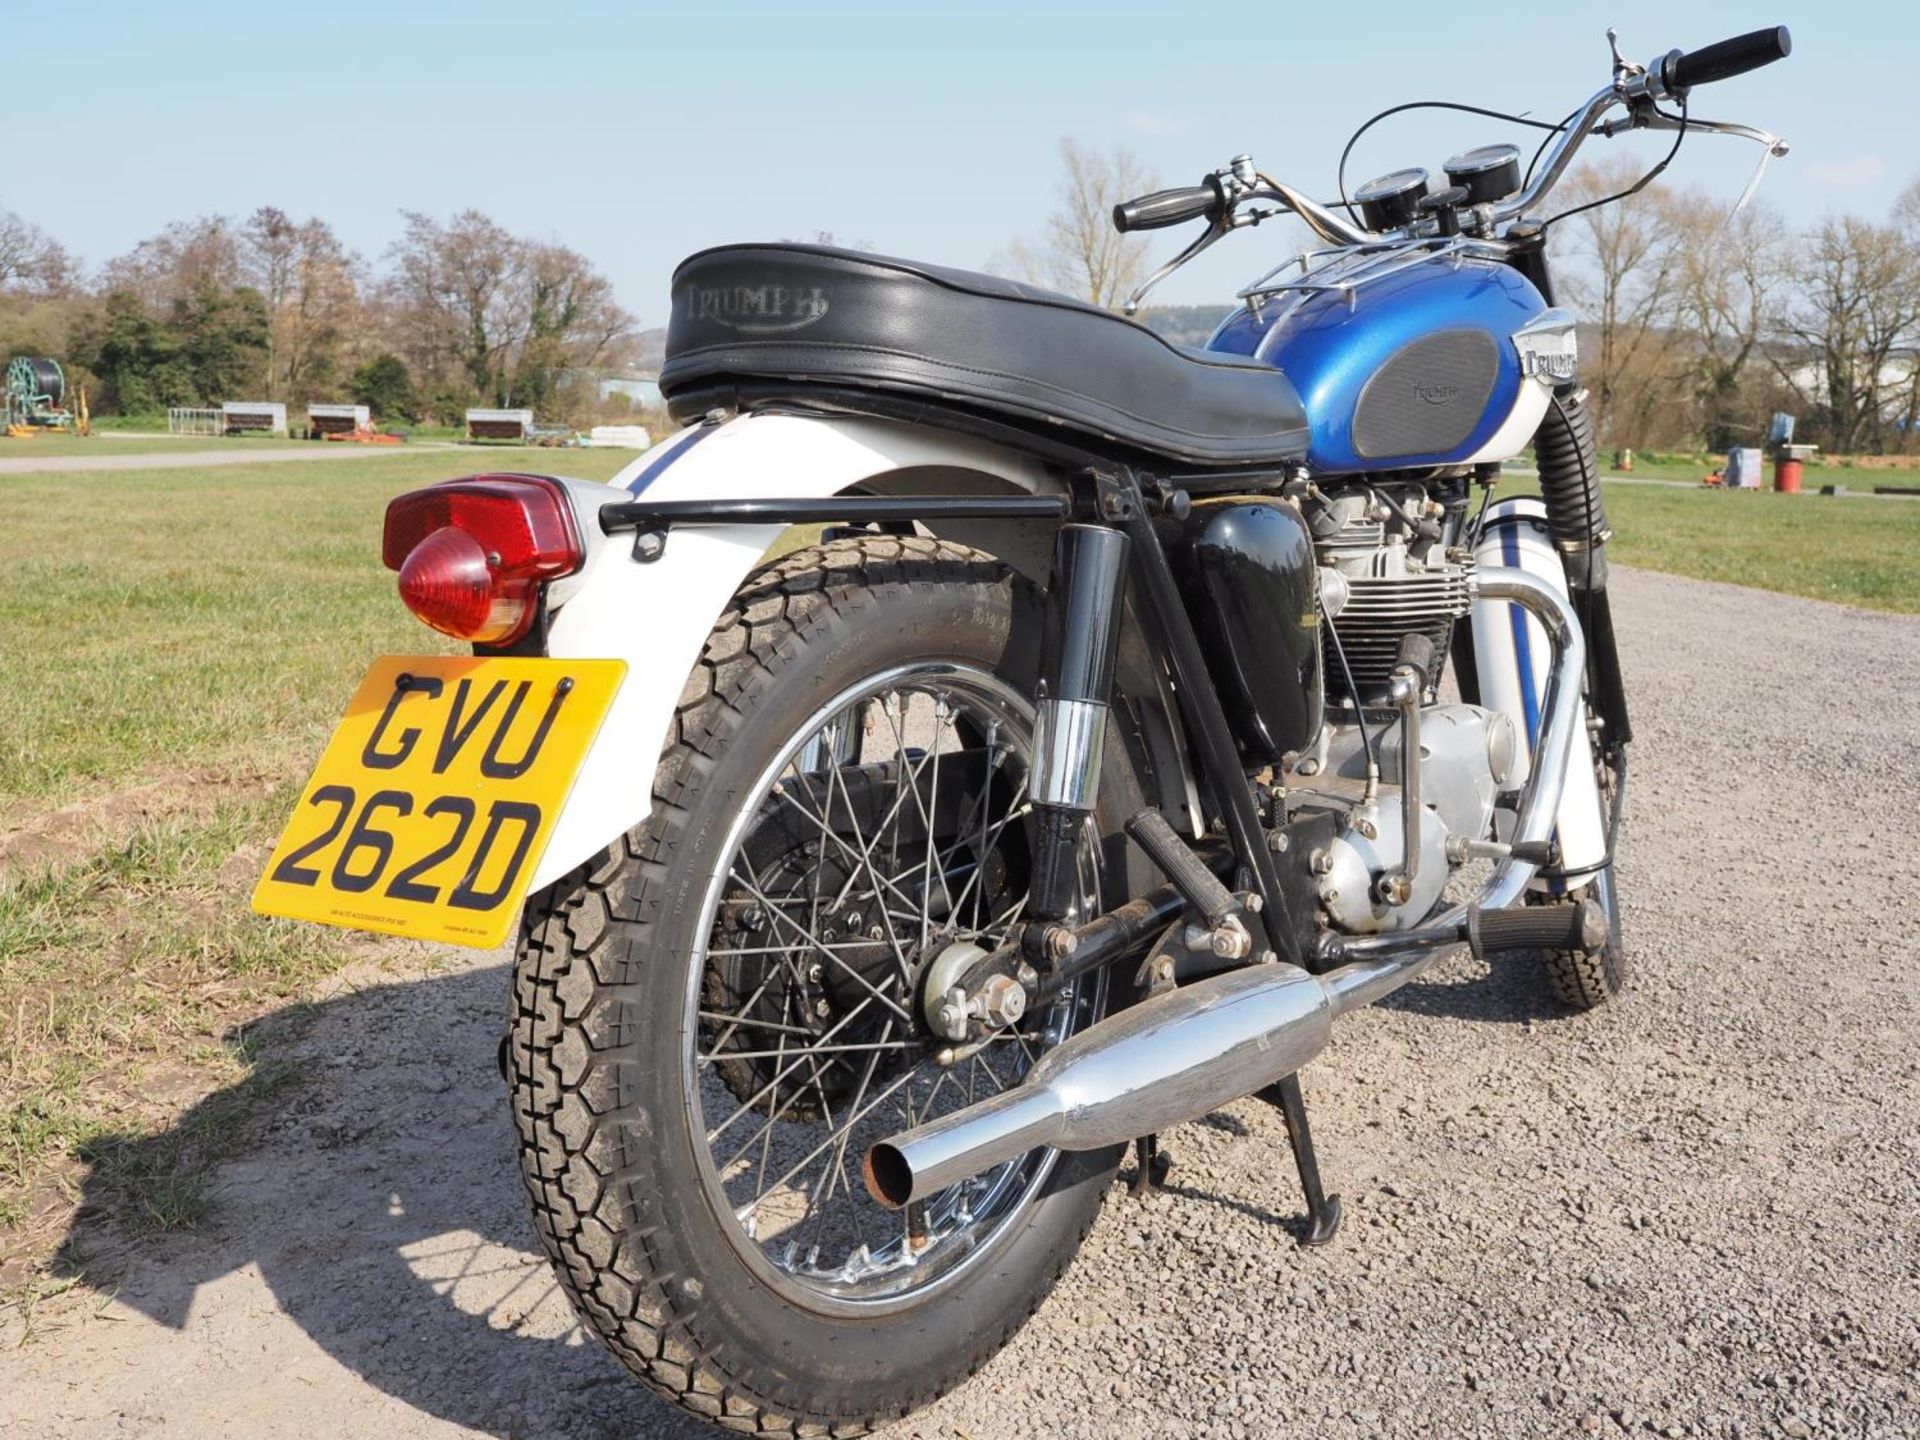 Triumph TR6 Trophy motorcycle. 1966. Matching engine and frame no. TR6RDU40711. Originally - Image 4 of 8